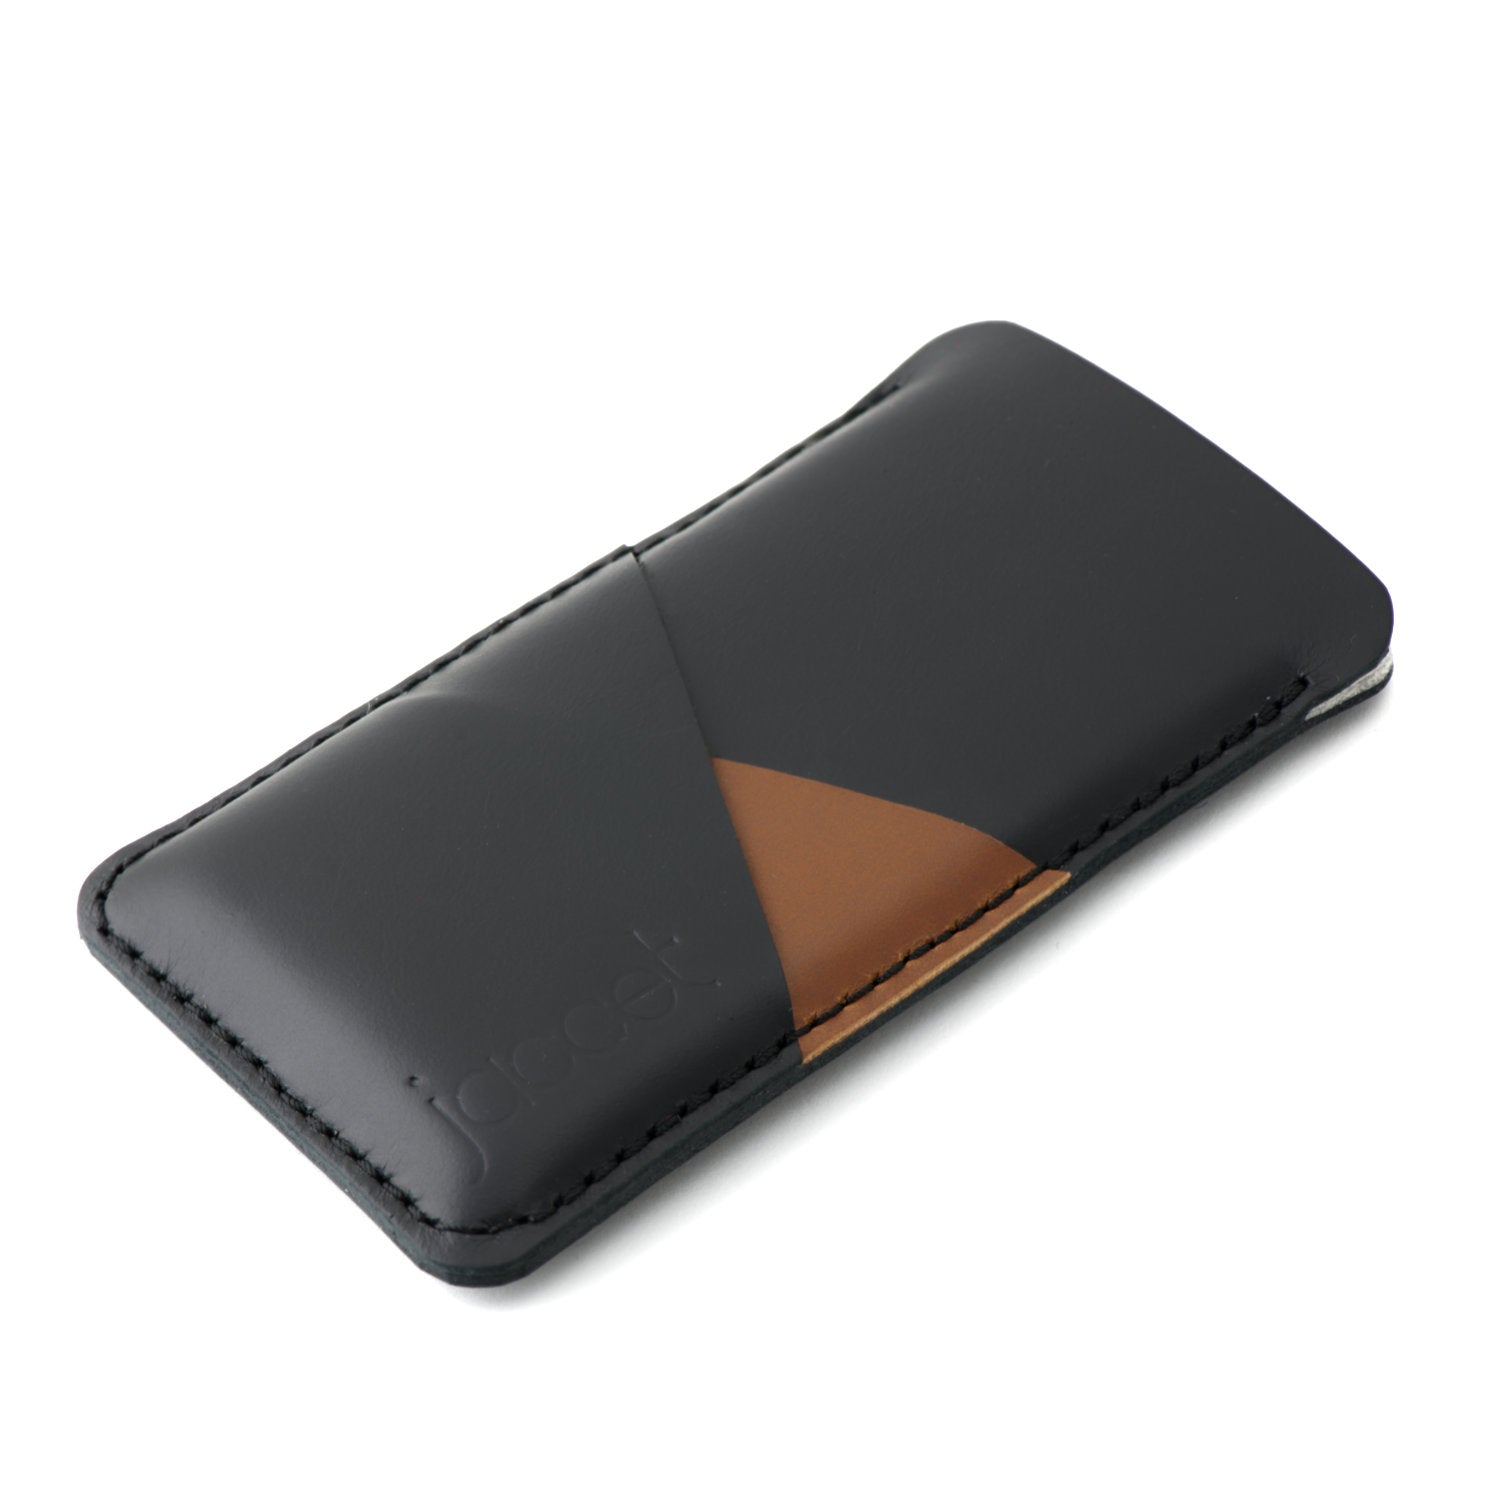 Full-grain leather Sony Xperia sleeve - Black leather with two pockets voor cards